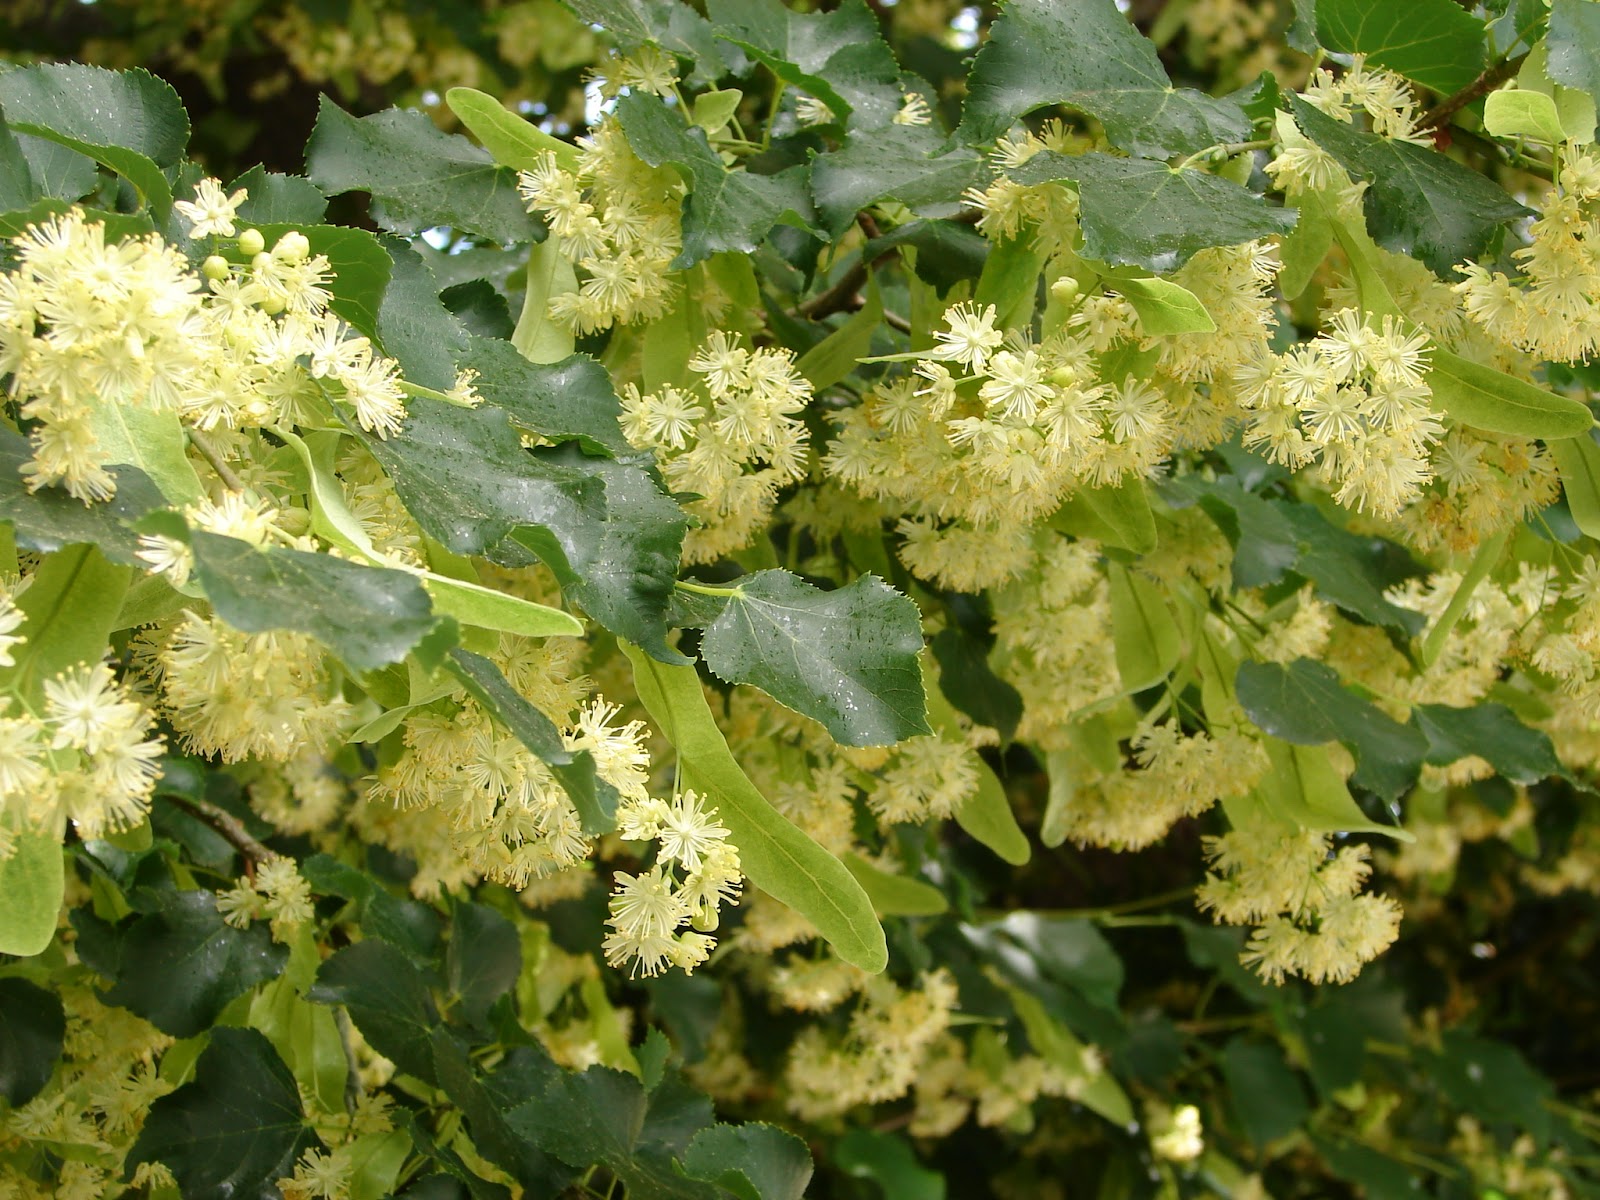 New Utah Gardener: Stop And Smell The Linden Trees!